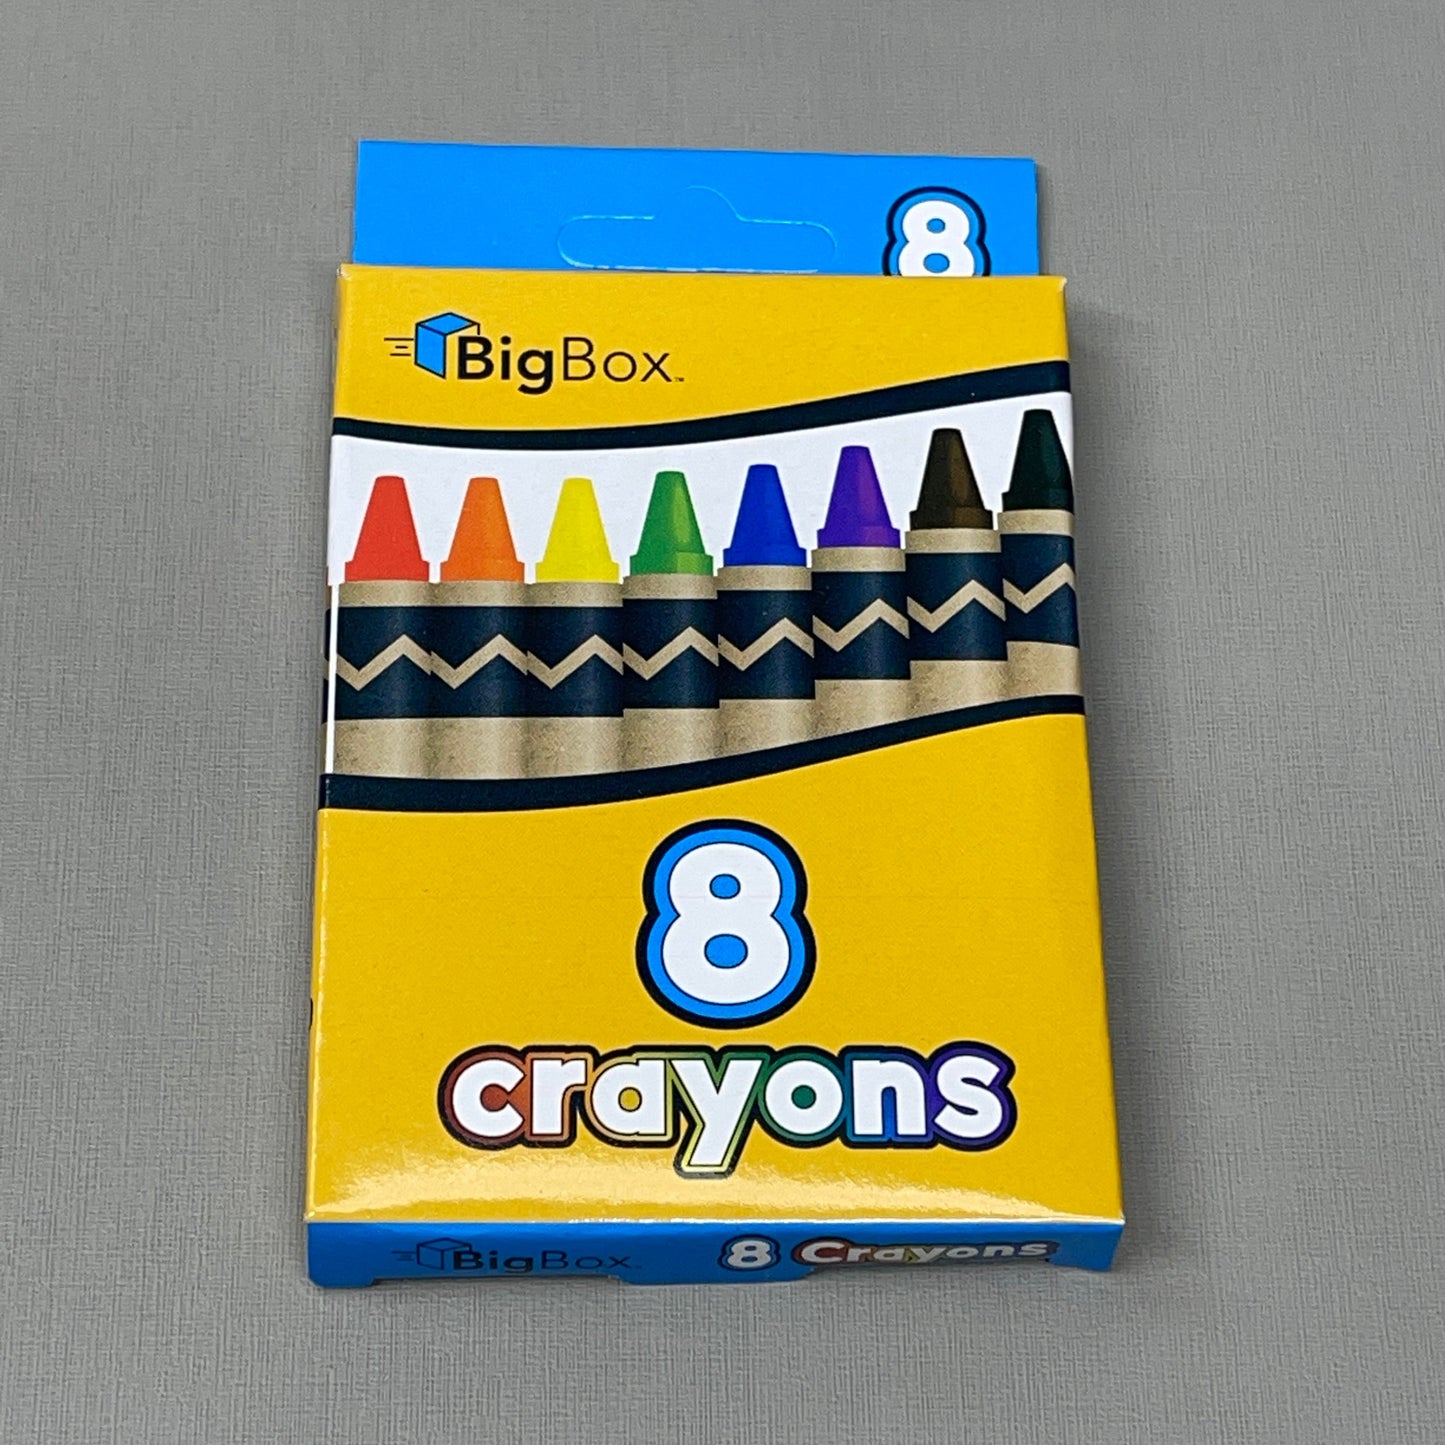 ZA@ BigBox Crayons 1 Case of 48 BXS (8 Crayons/box) Assorted Colors 2345095 (New)